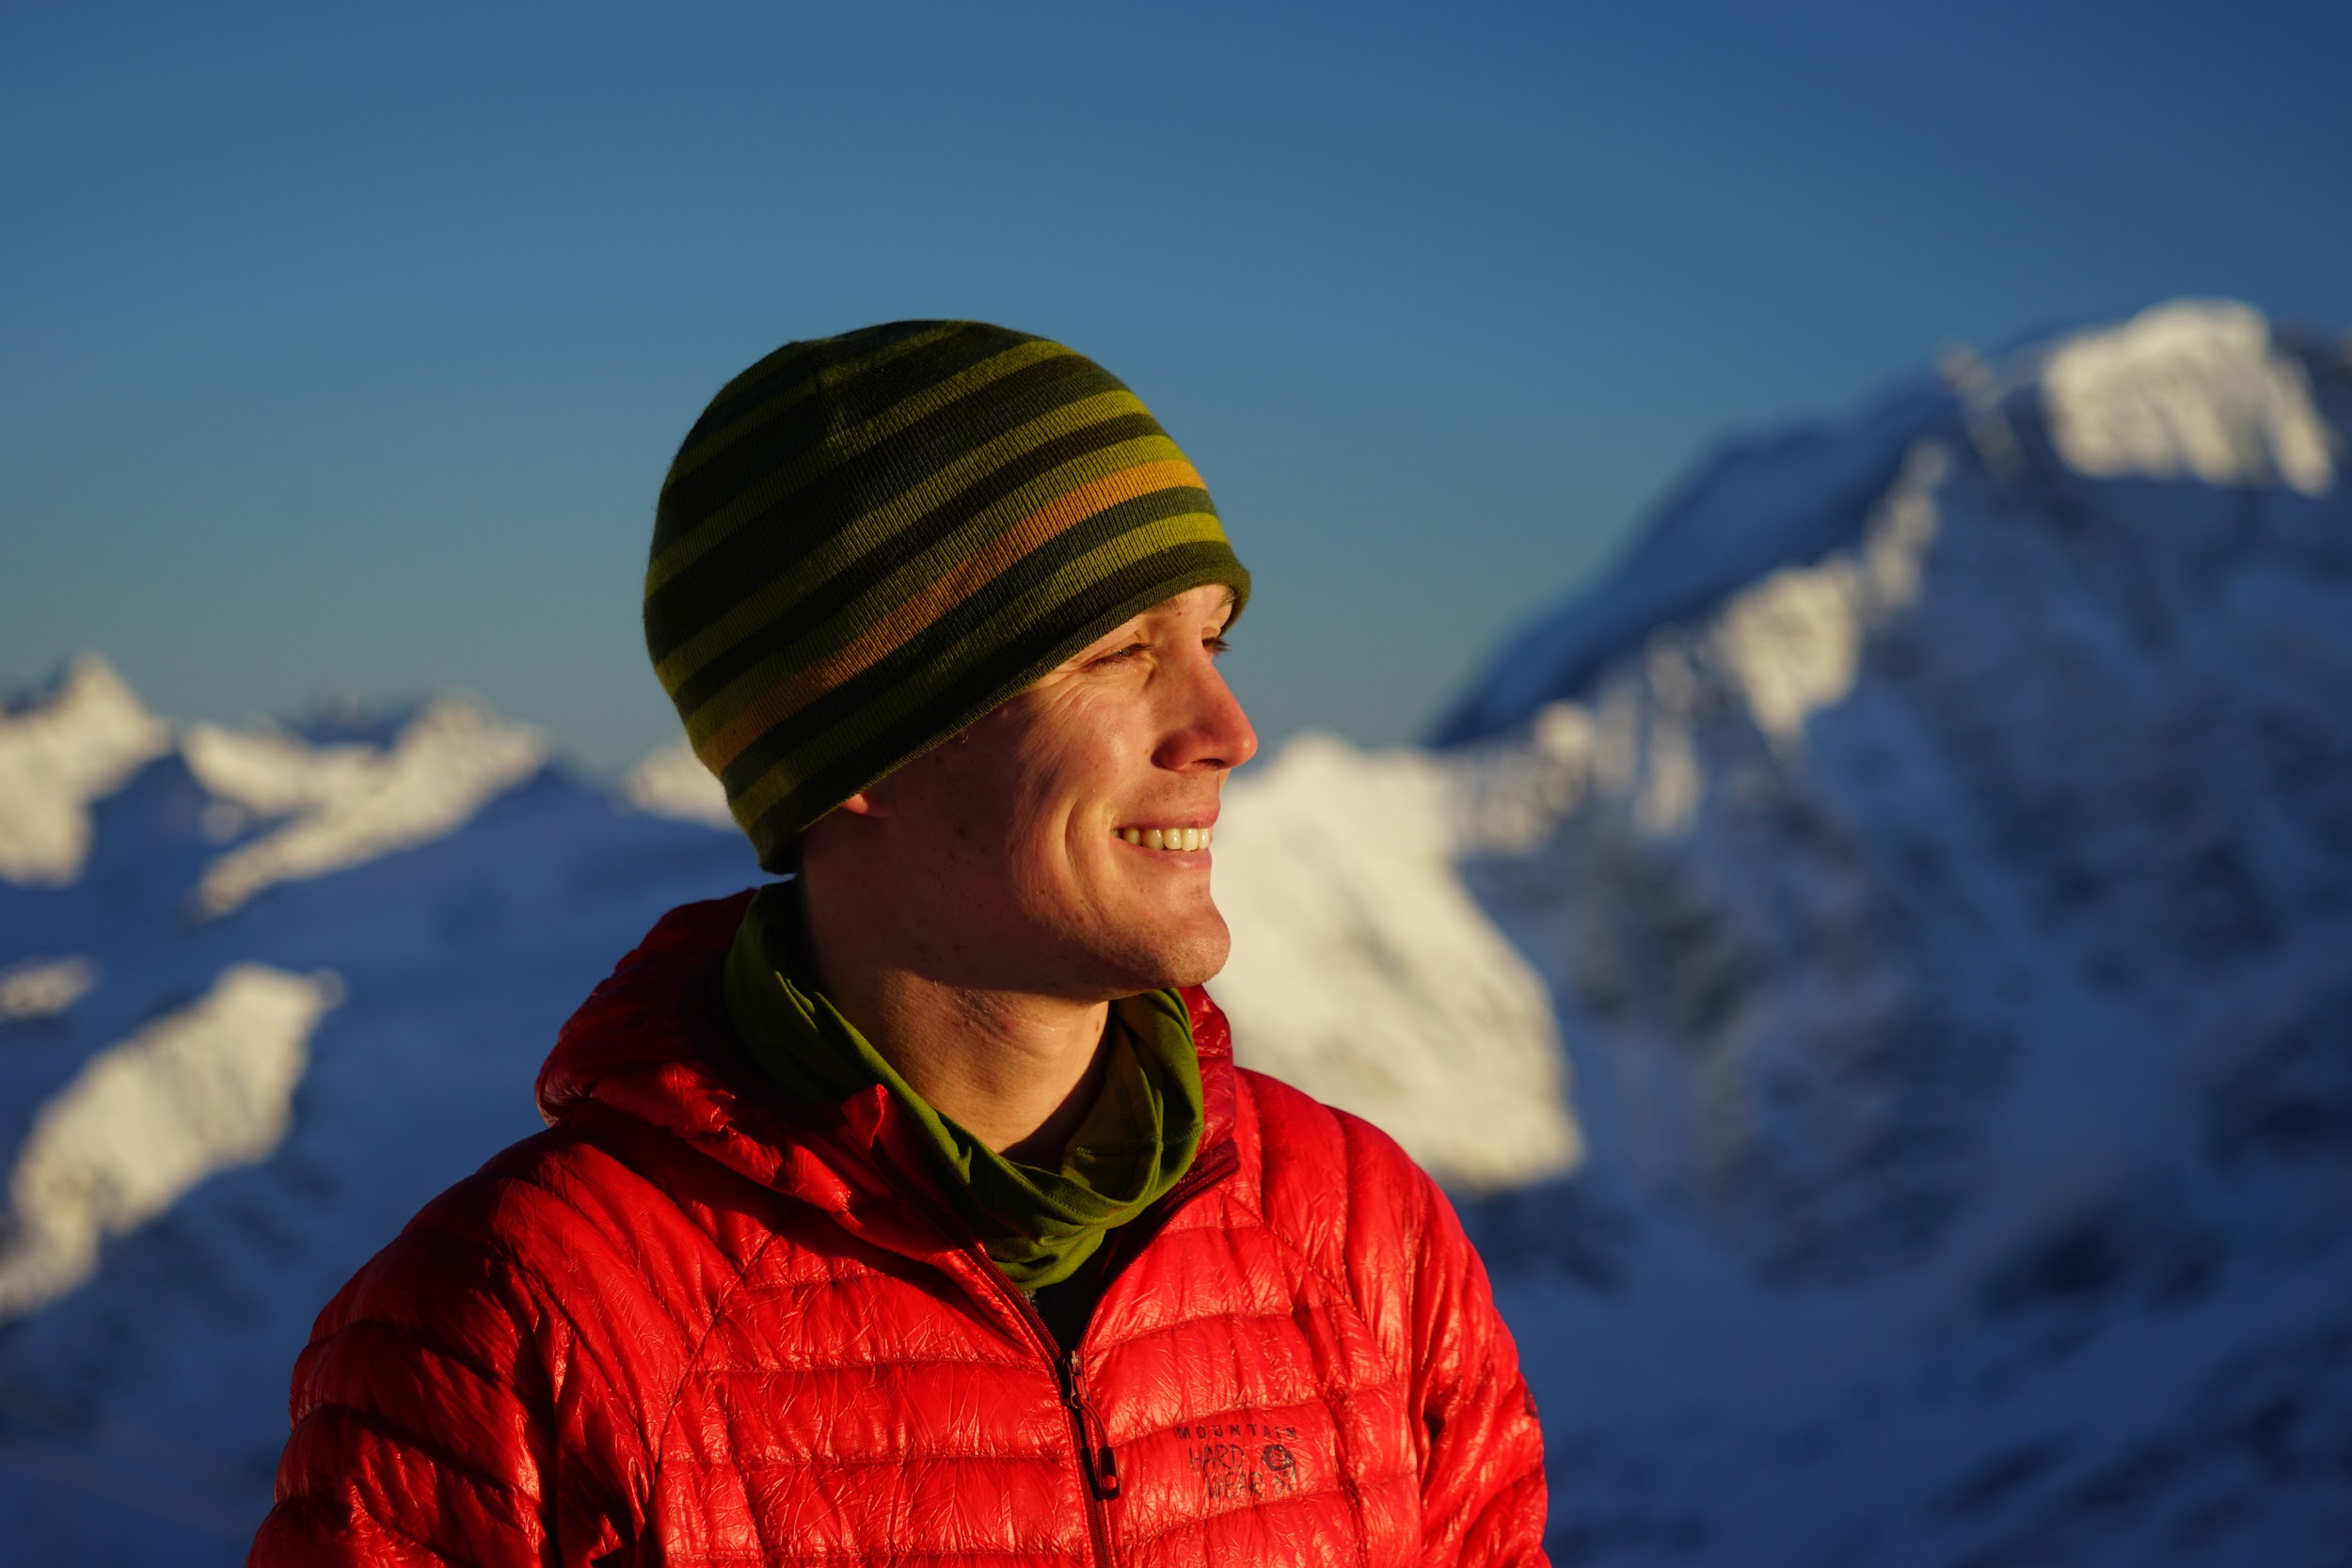 Colin O'Brady, a Caucasian man wearing a red hooded coat and a striped winter cap, looks off into the distance while sunlight shines on his face. In the background, snowy mountains are visible against a bright blue sky.